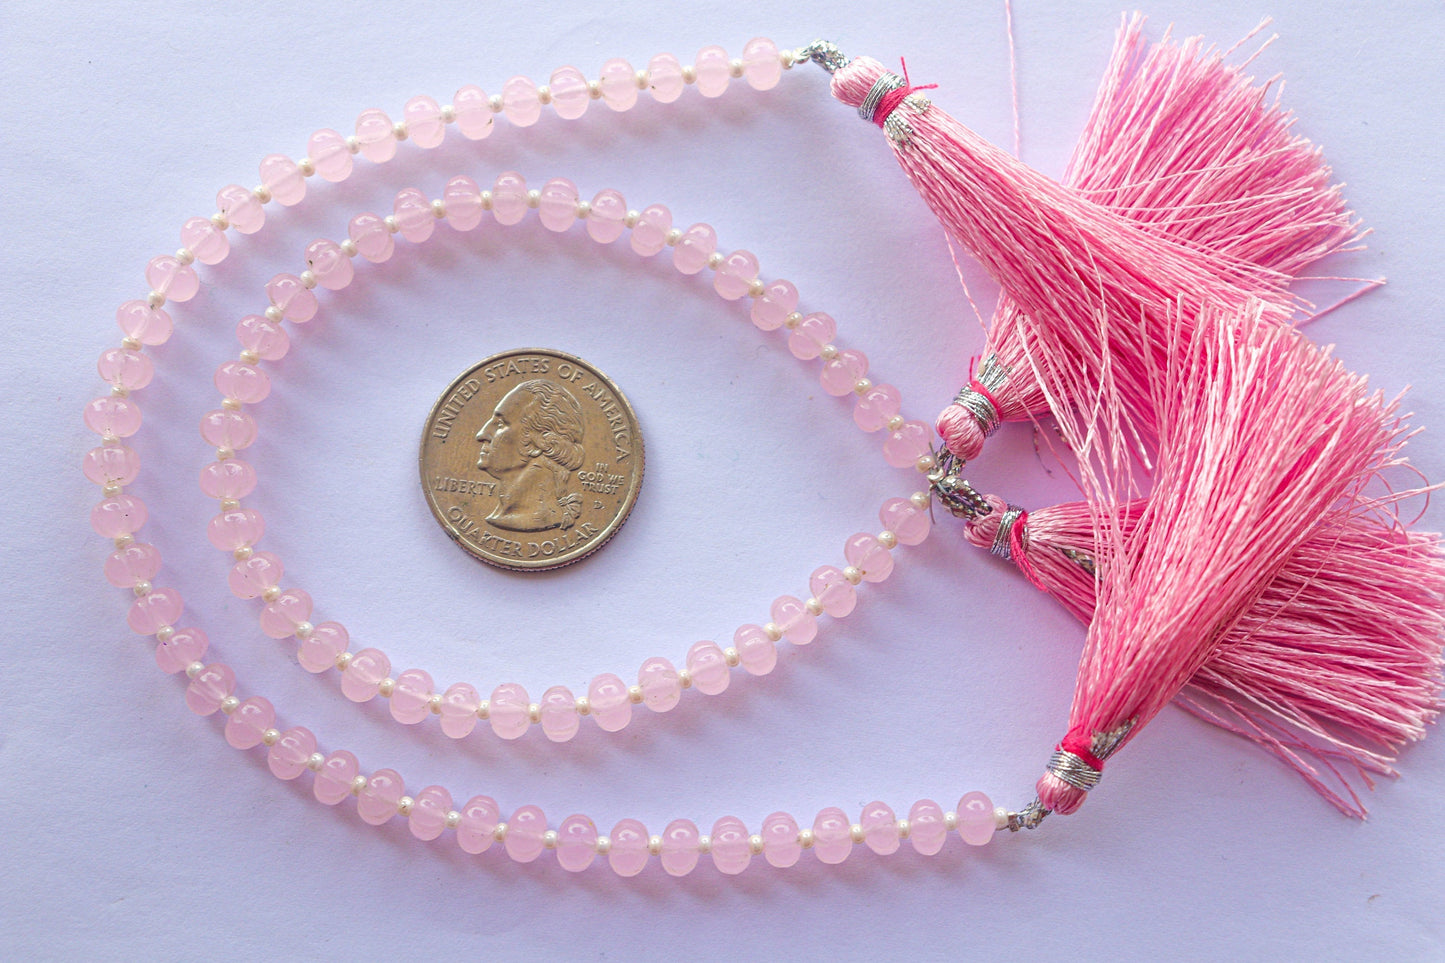 Rose Quartz Carved Melons | 6x6mm | 8 inch | 39 Pieces | Center Drill | Natural gemstone beads | Beadsforyourjewellery | 959 Beadsforyourjewelry